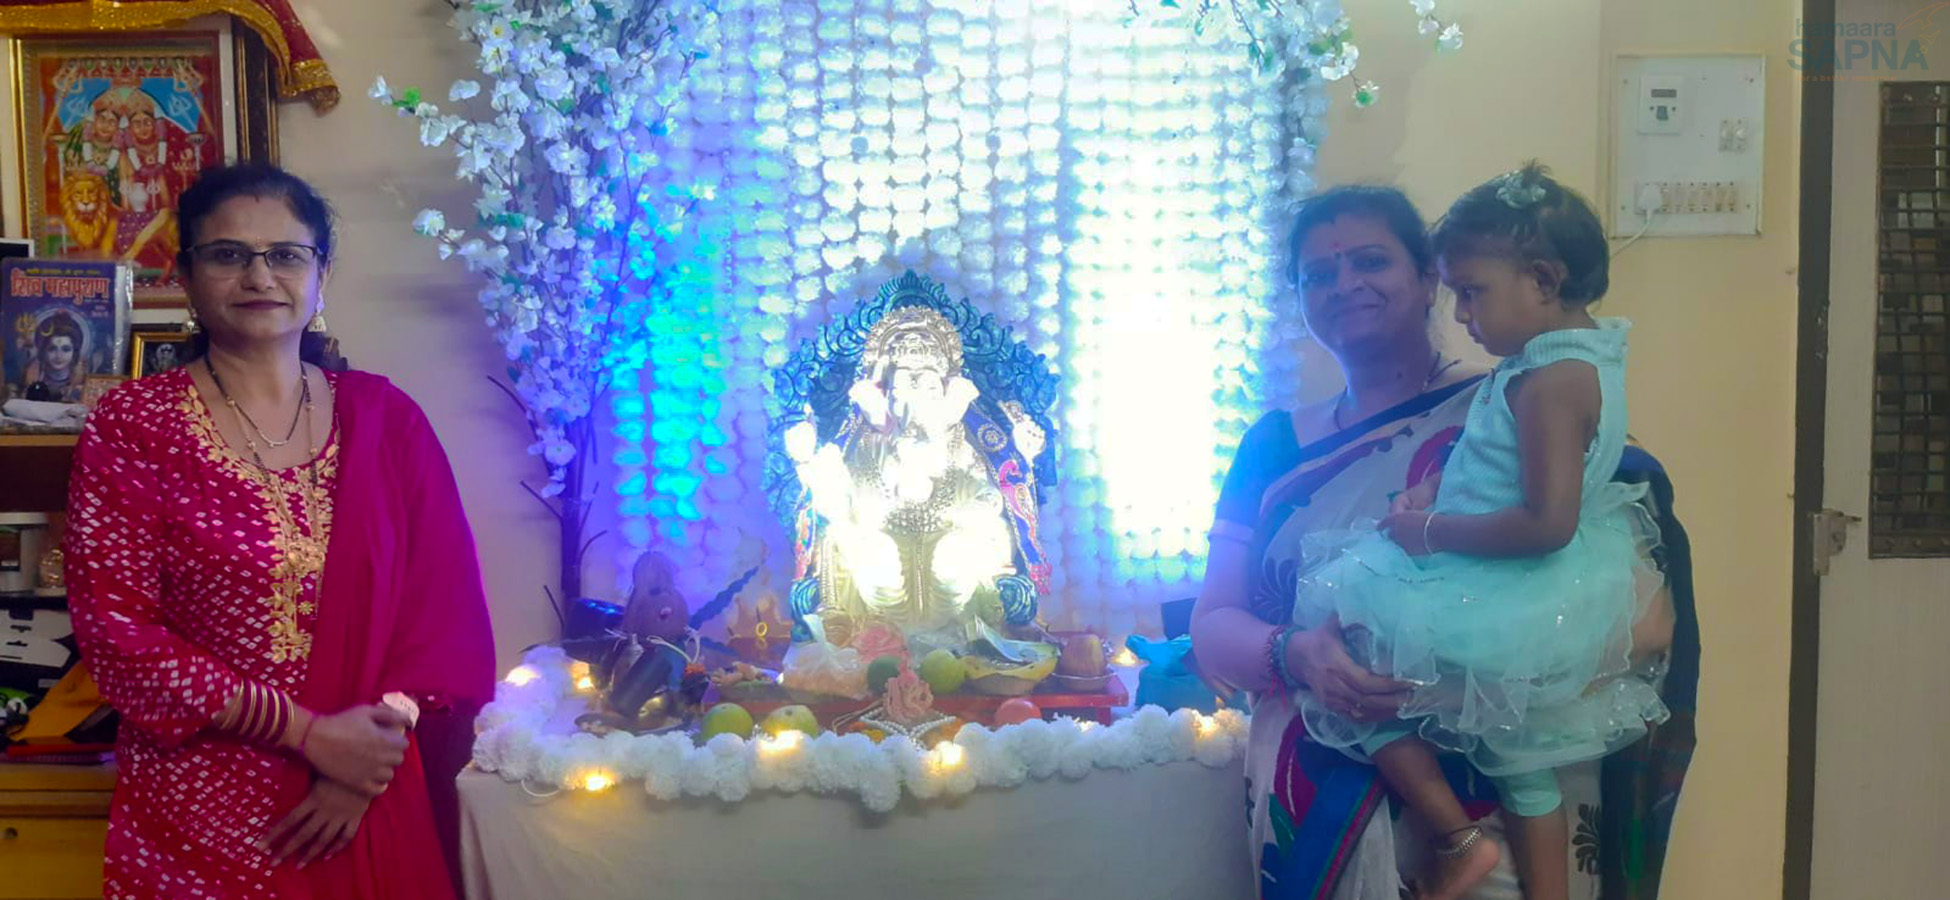 The Deputy Project Director visit a beneficiary's house to take the blessings of Lord Ganesh